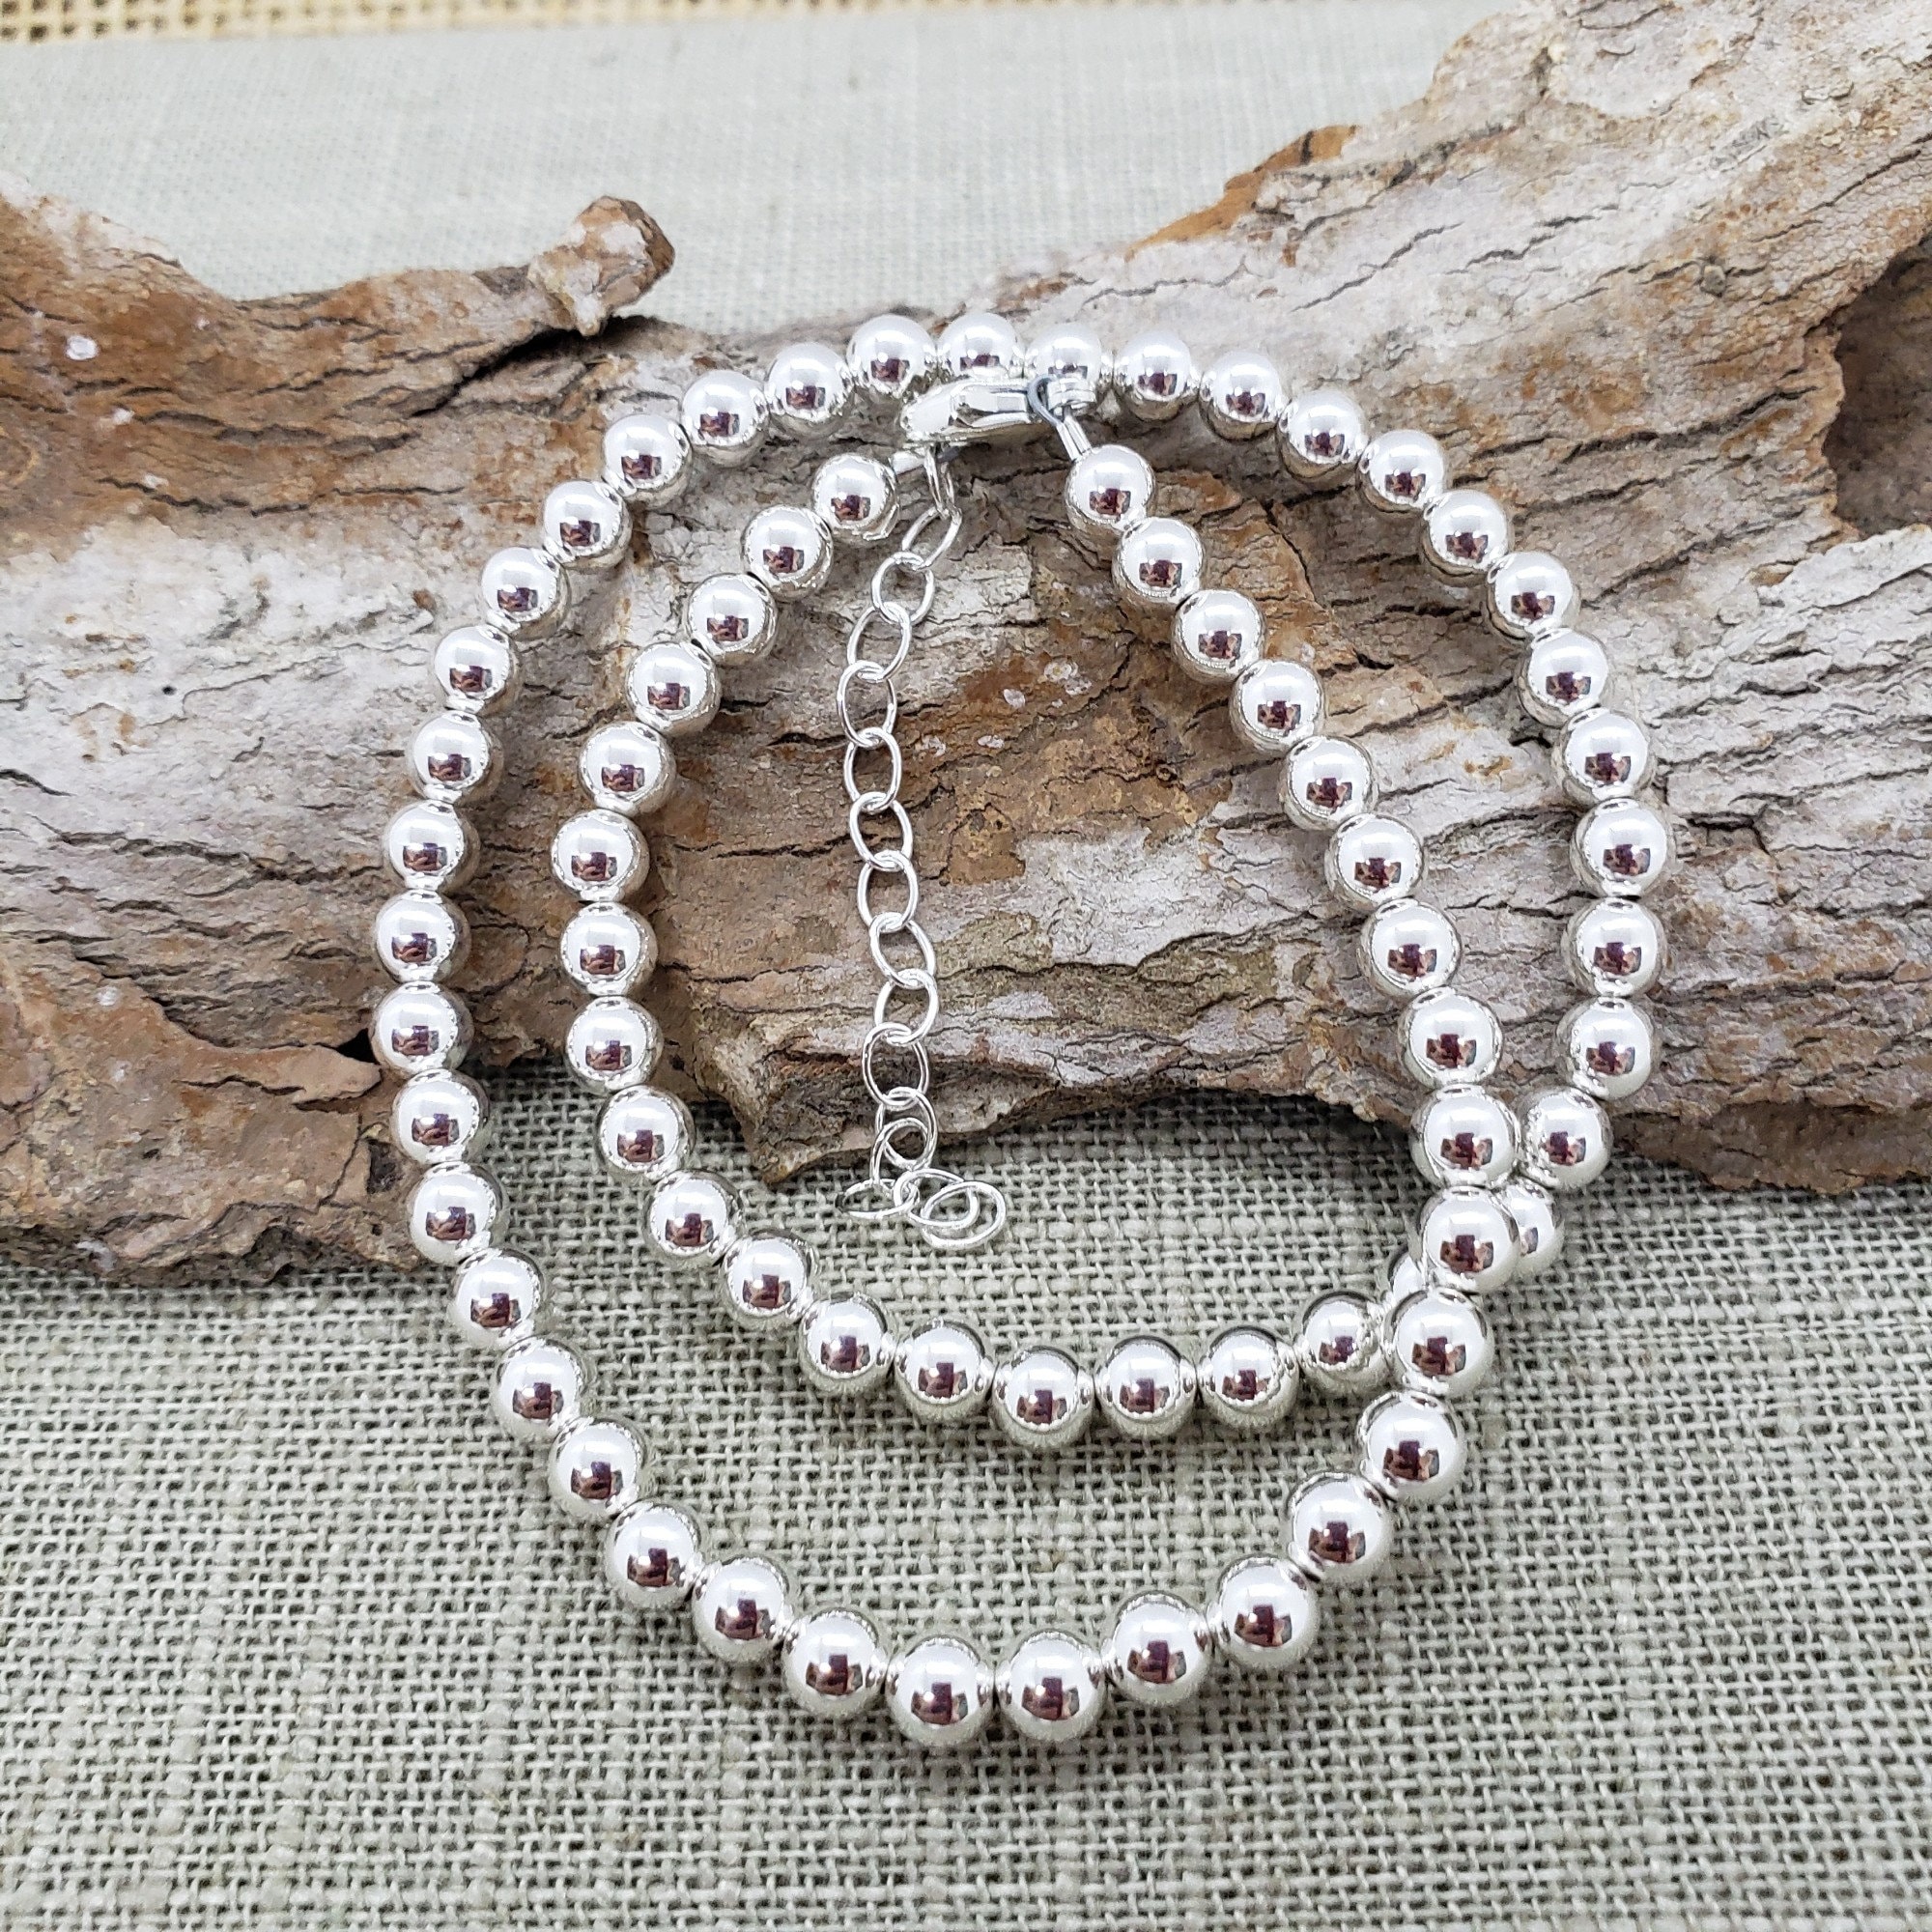 4mm Sterling Silver Bead Necklace, 4mm Silver Bead Choker Necklace, Everyday Silver Necklace, 4mm Silver Bead Strand, Layer Necklace